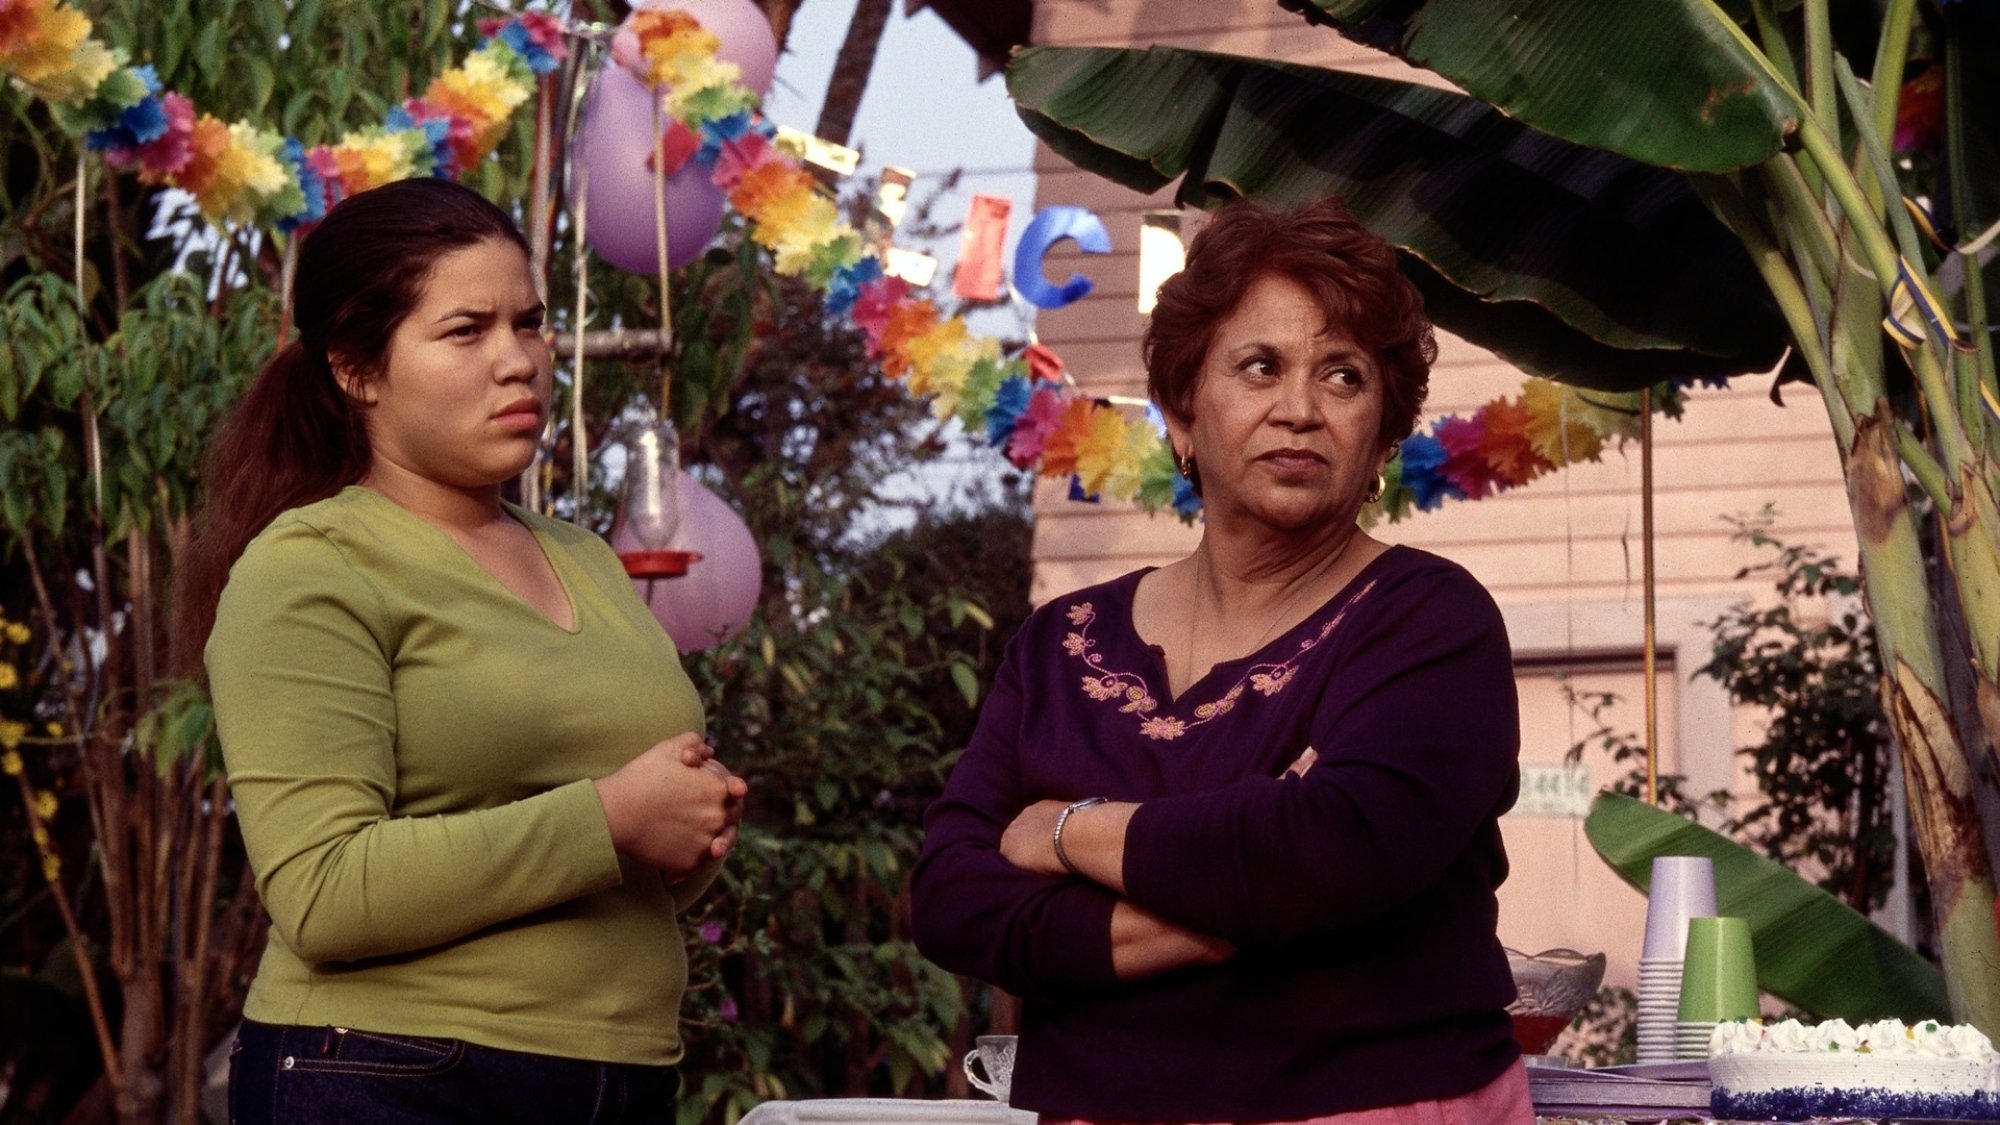 America Ferrera and Lupe Ontiveros in "Real Women Have Curves."